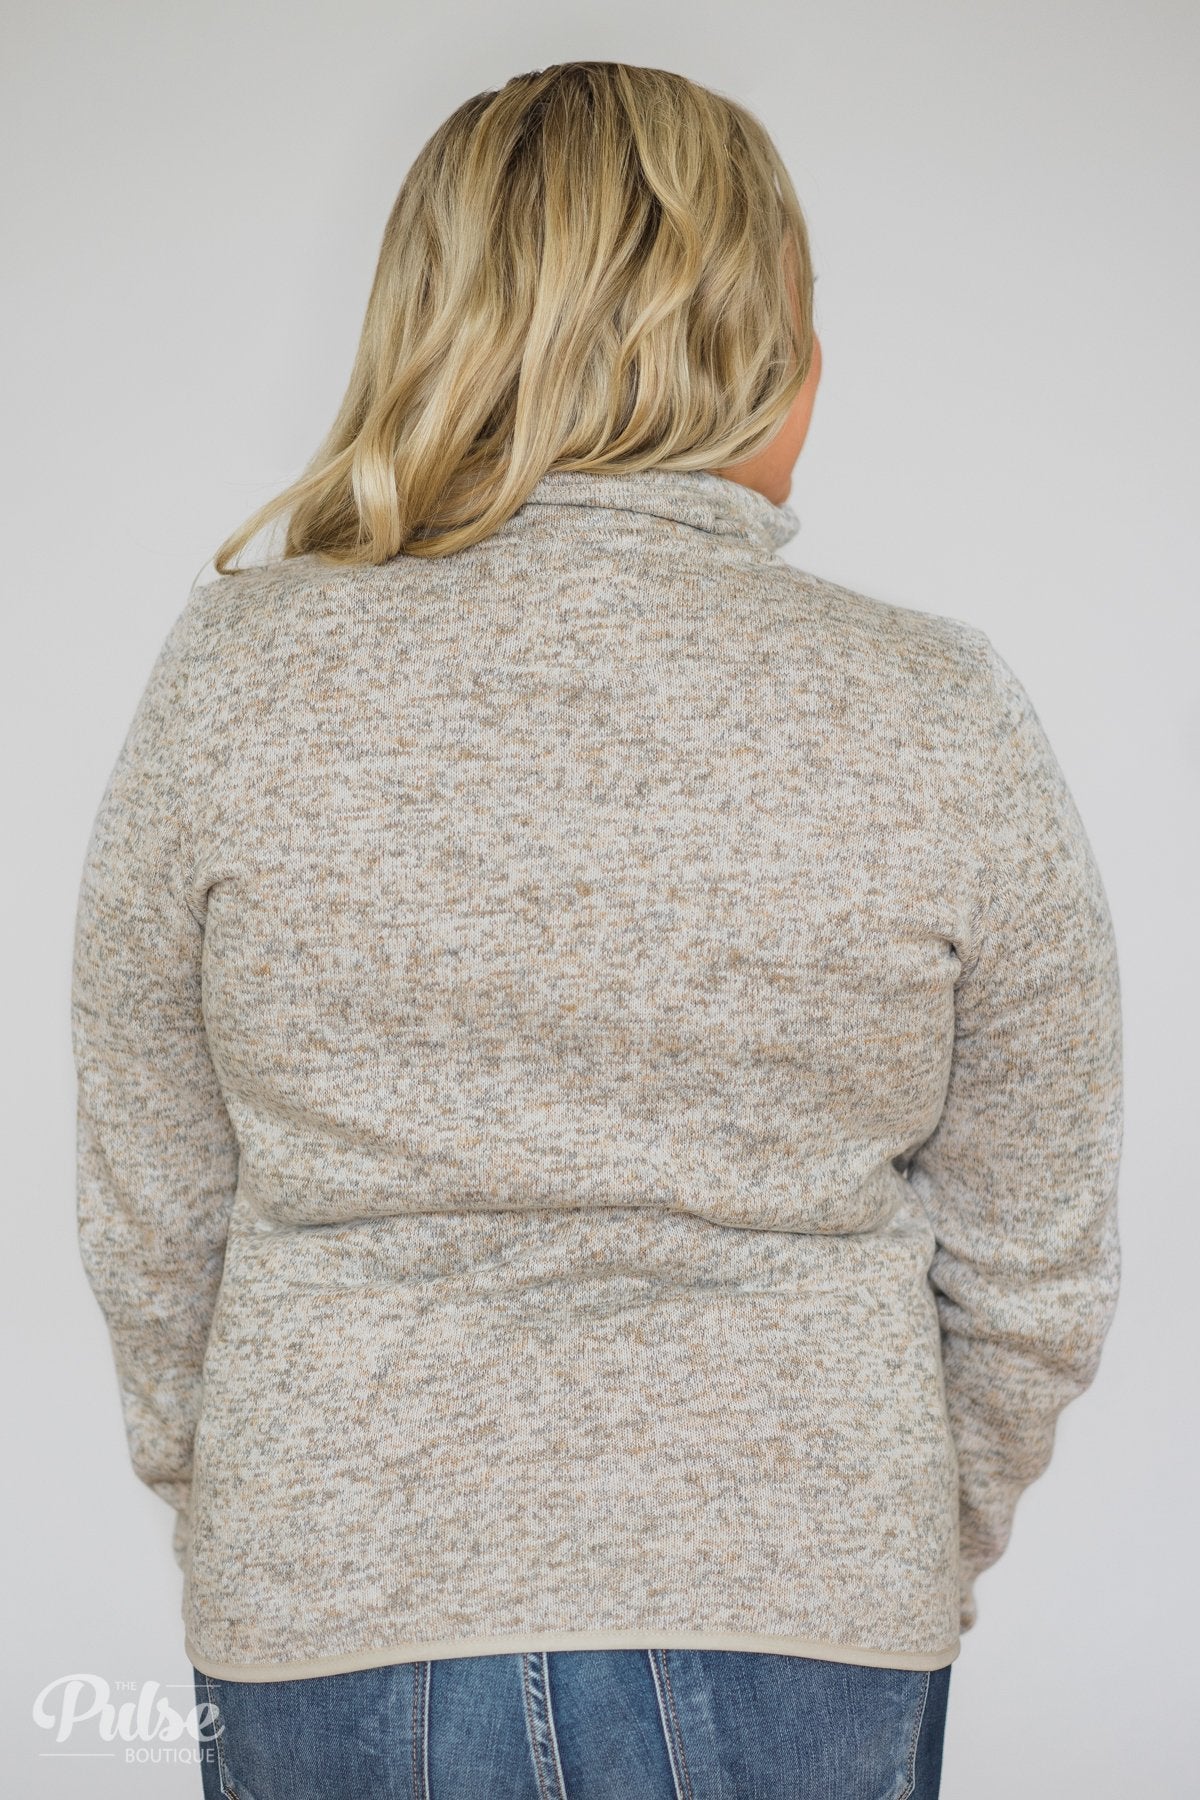 Thread & Supply Pullover Quarter Zip- Heather Oatmeal